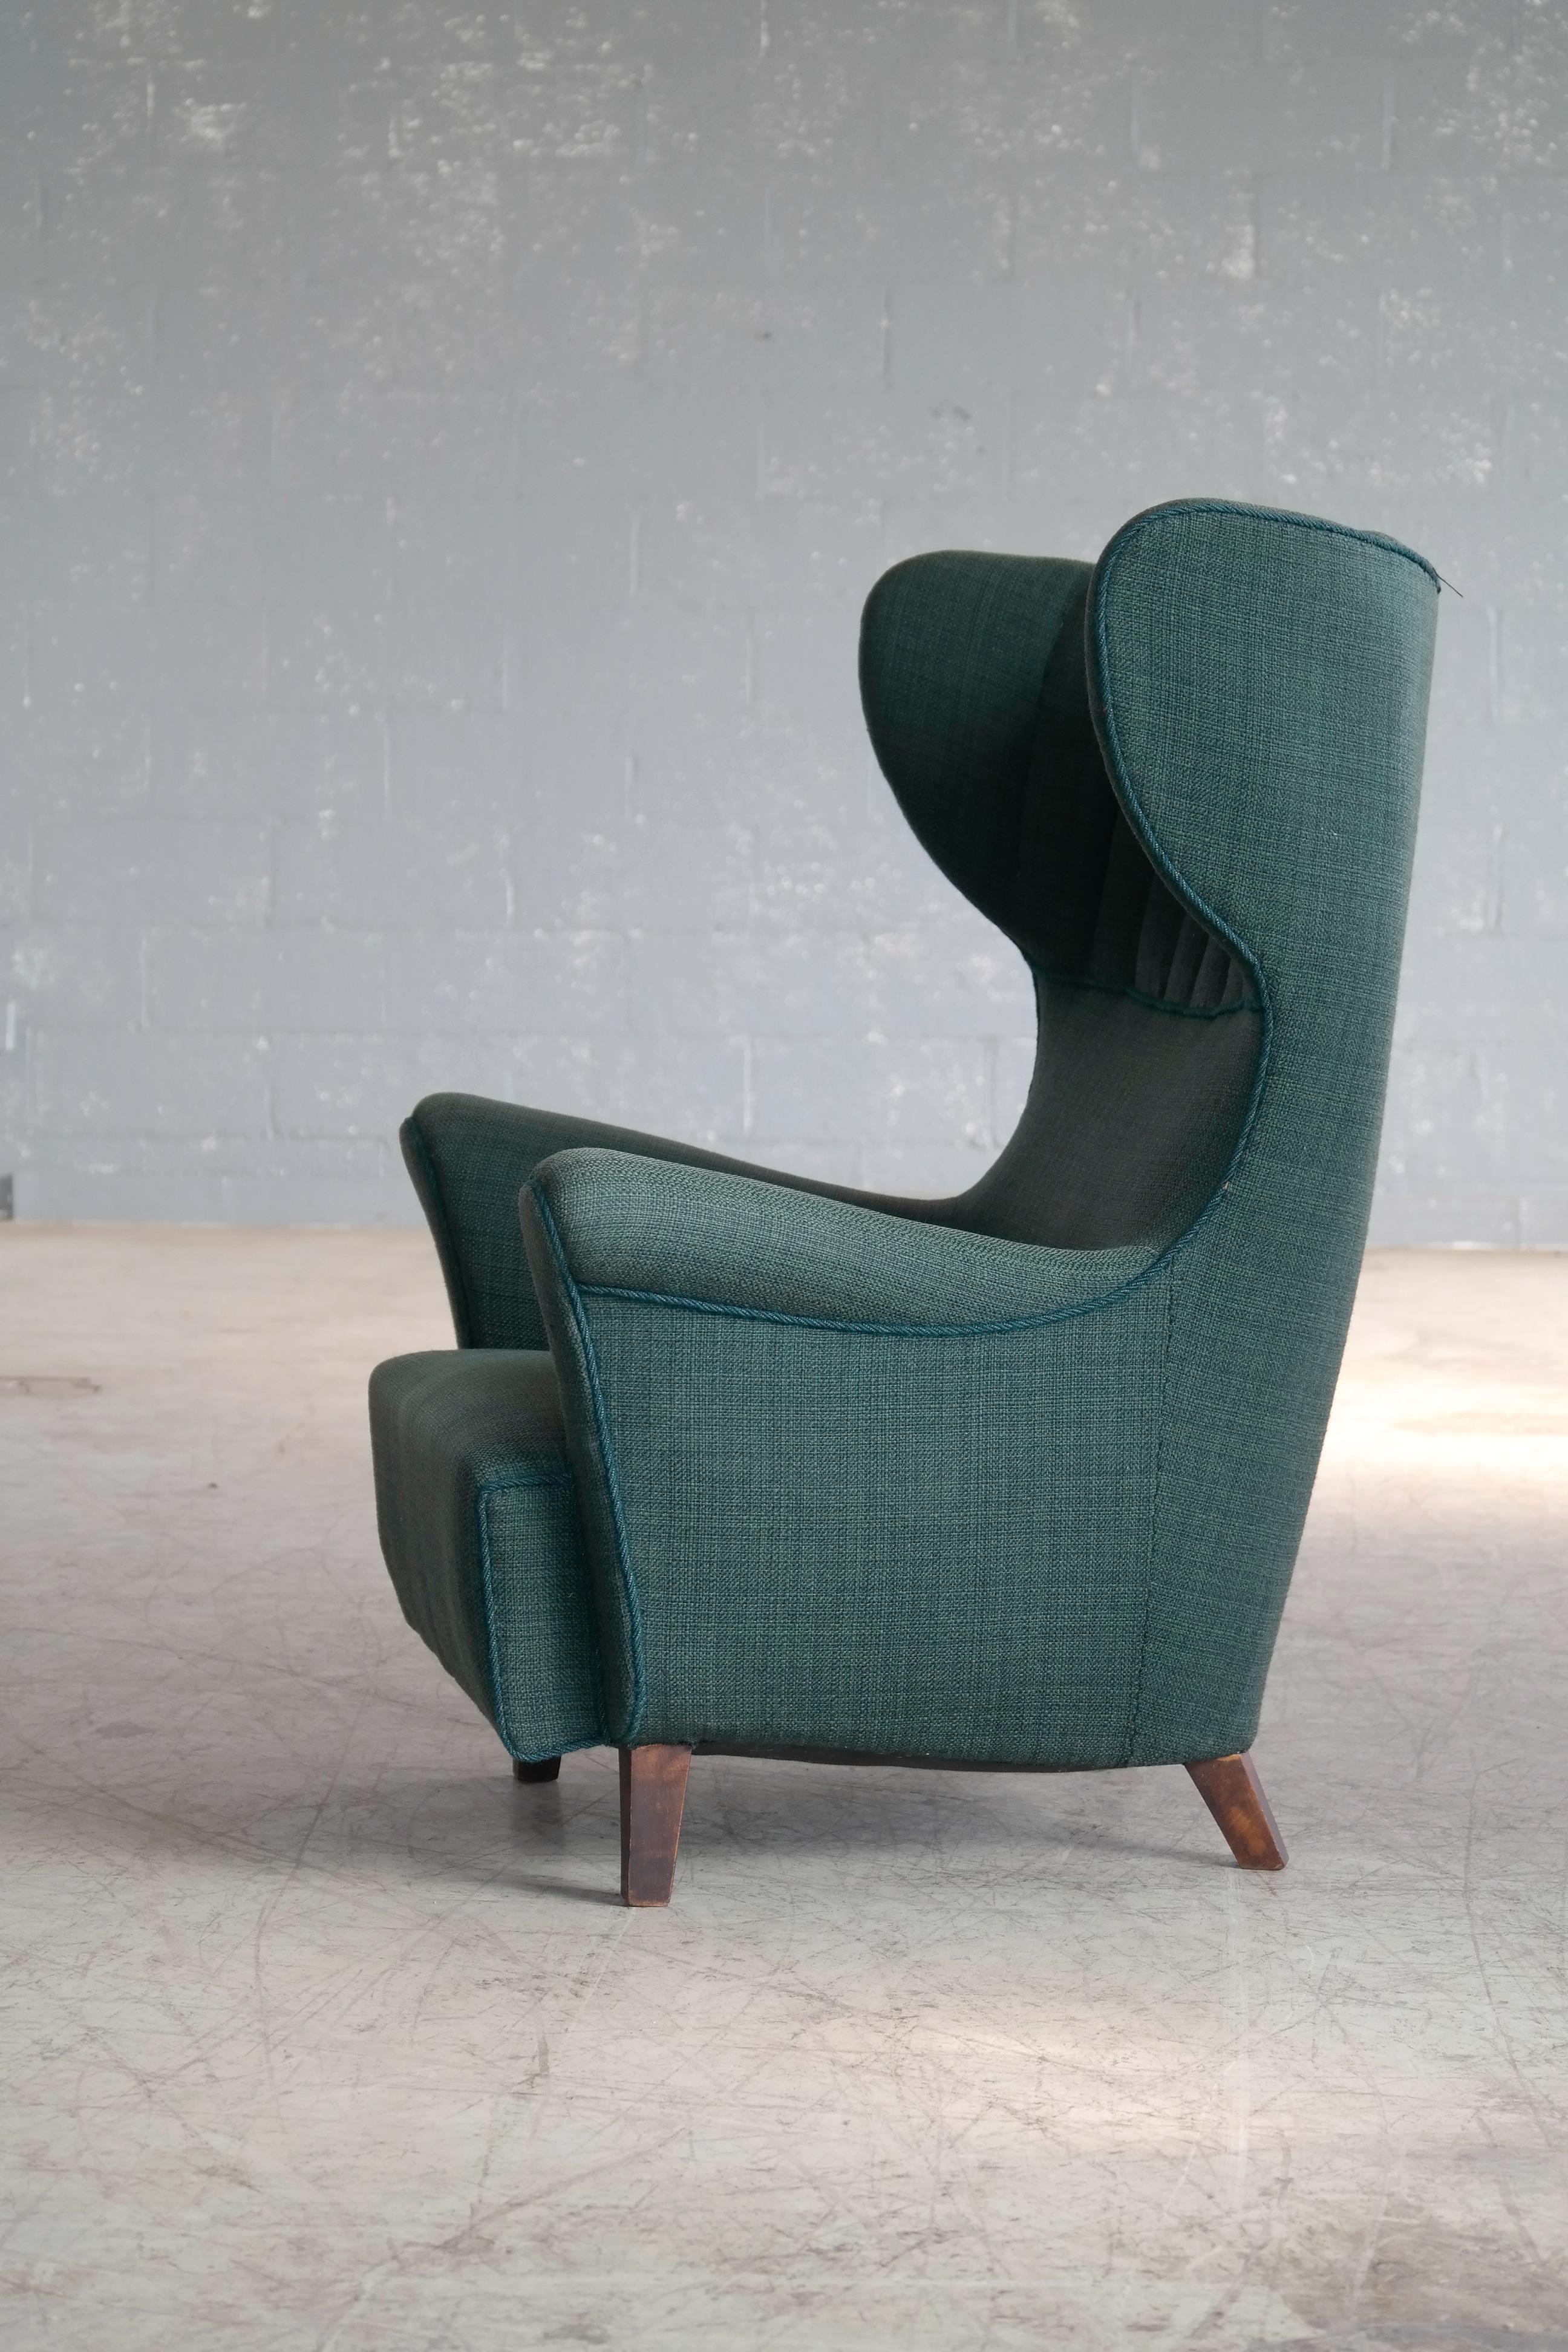 Danish 1950s Classic Flemming Lassen Style High Wing Back Lounge Chair 1